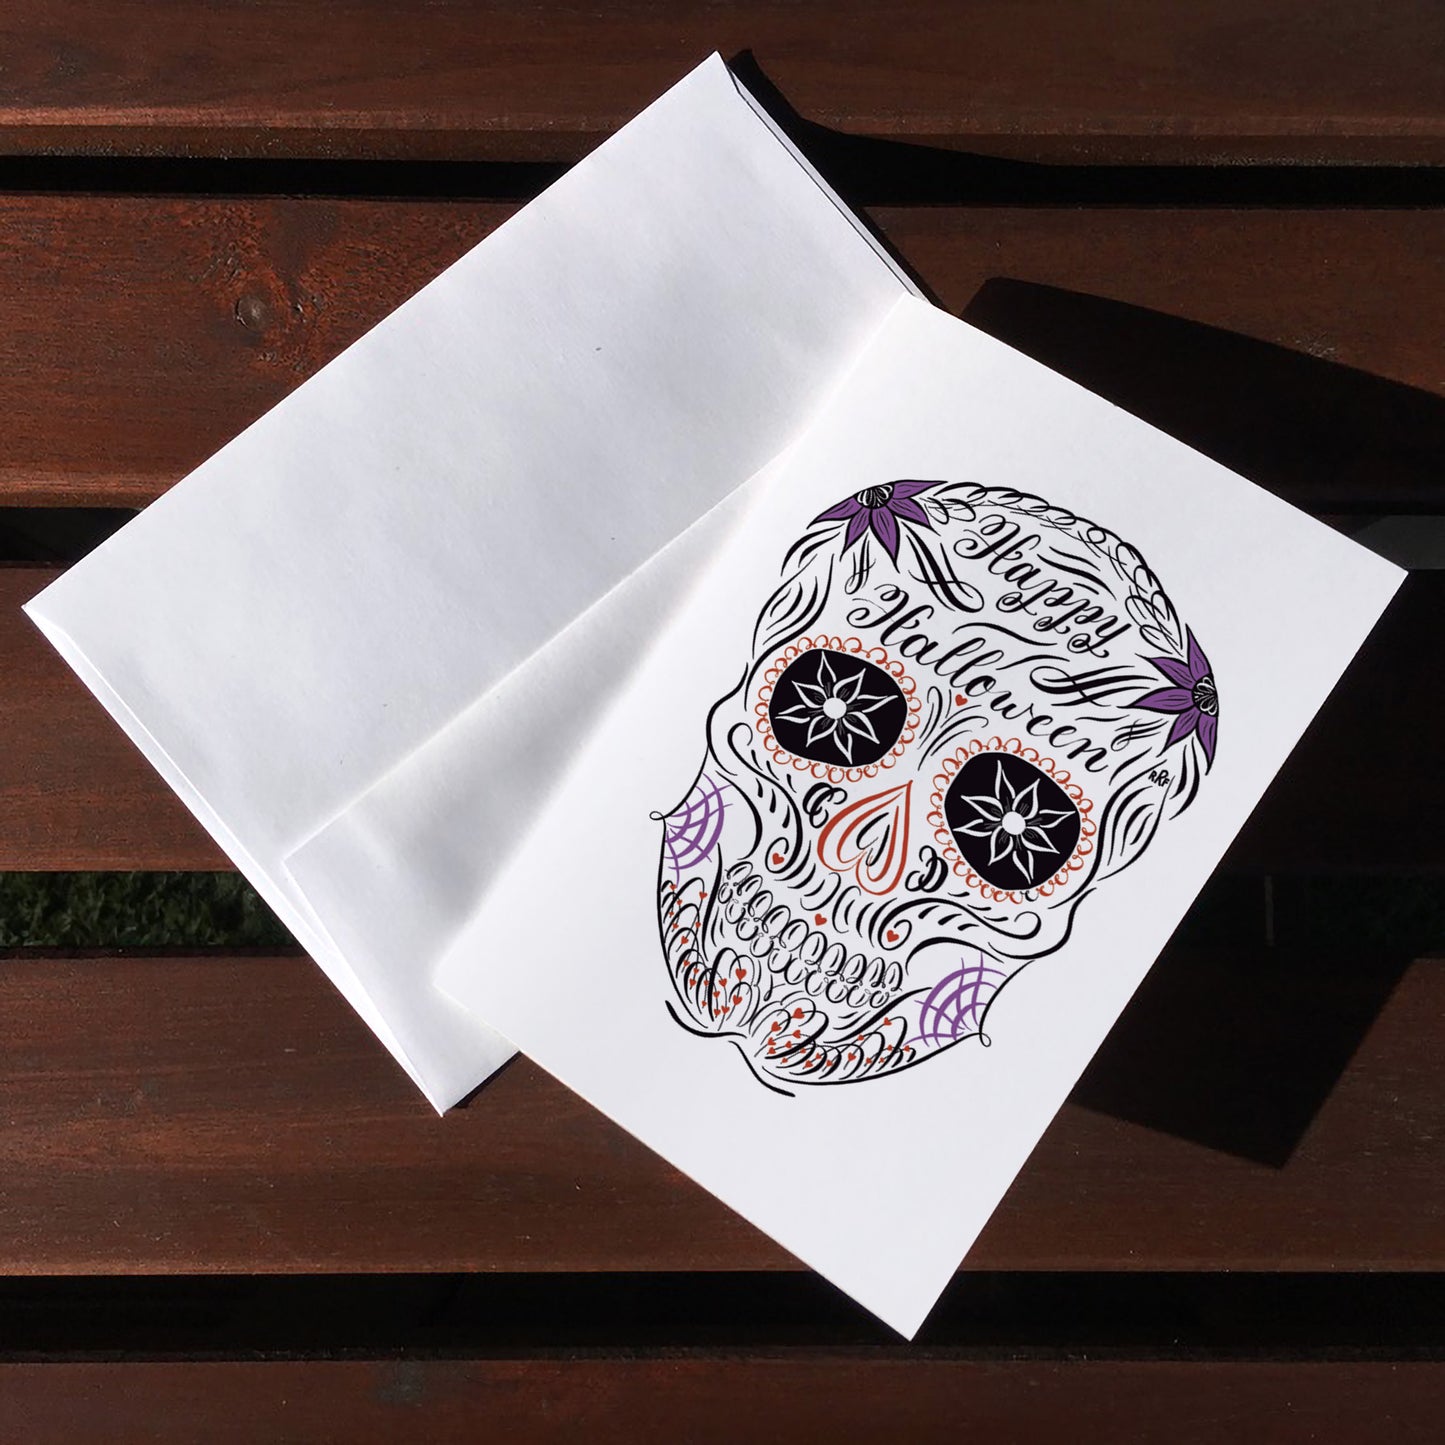 A top lifestyle view of the halloween calligraphy postcard: "Sugar Skull" design